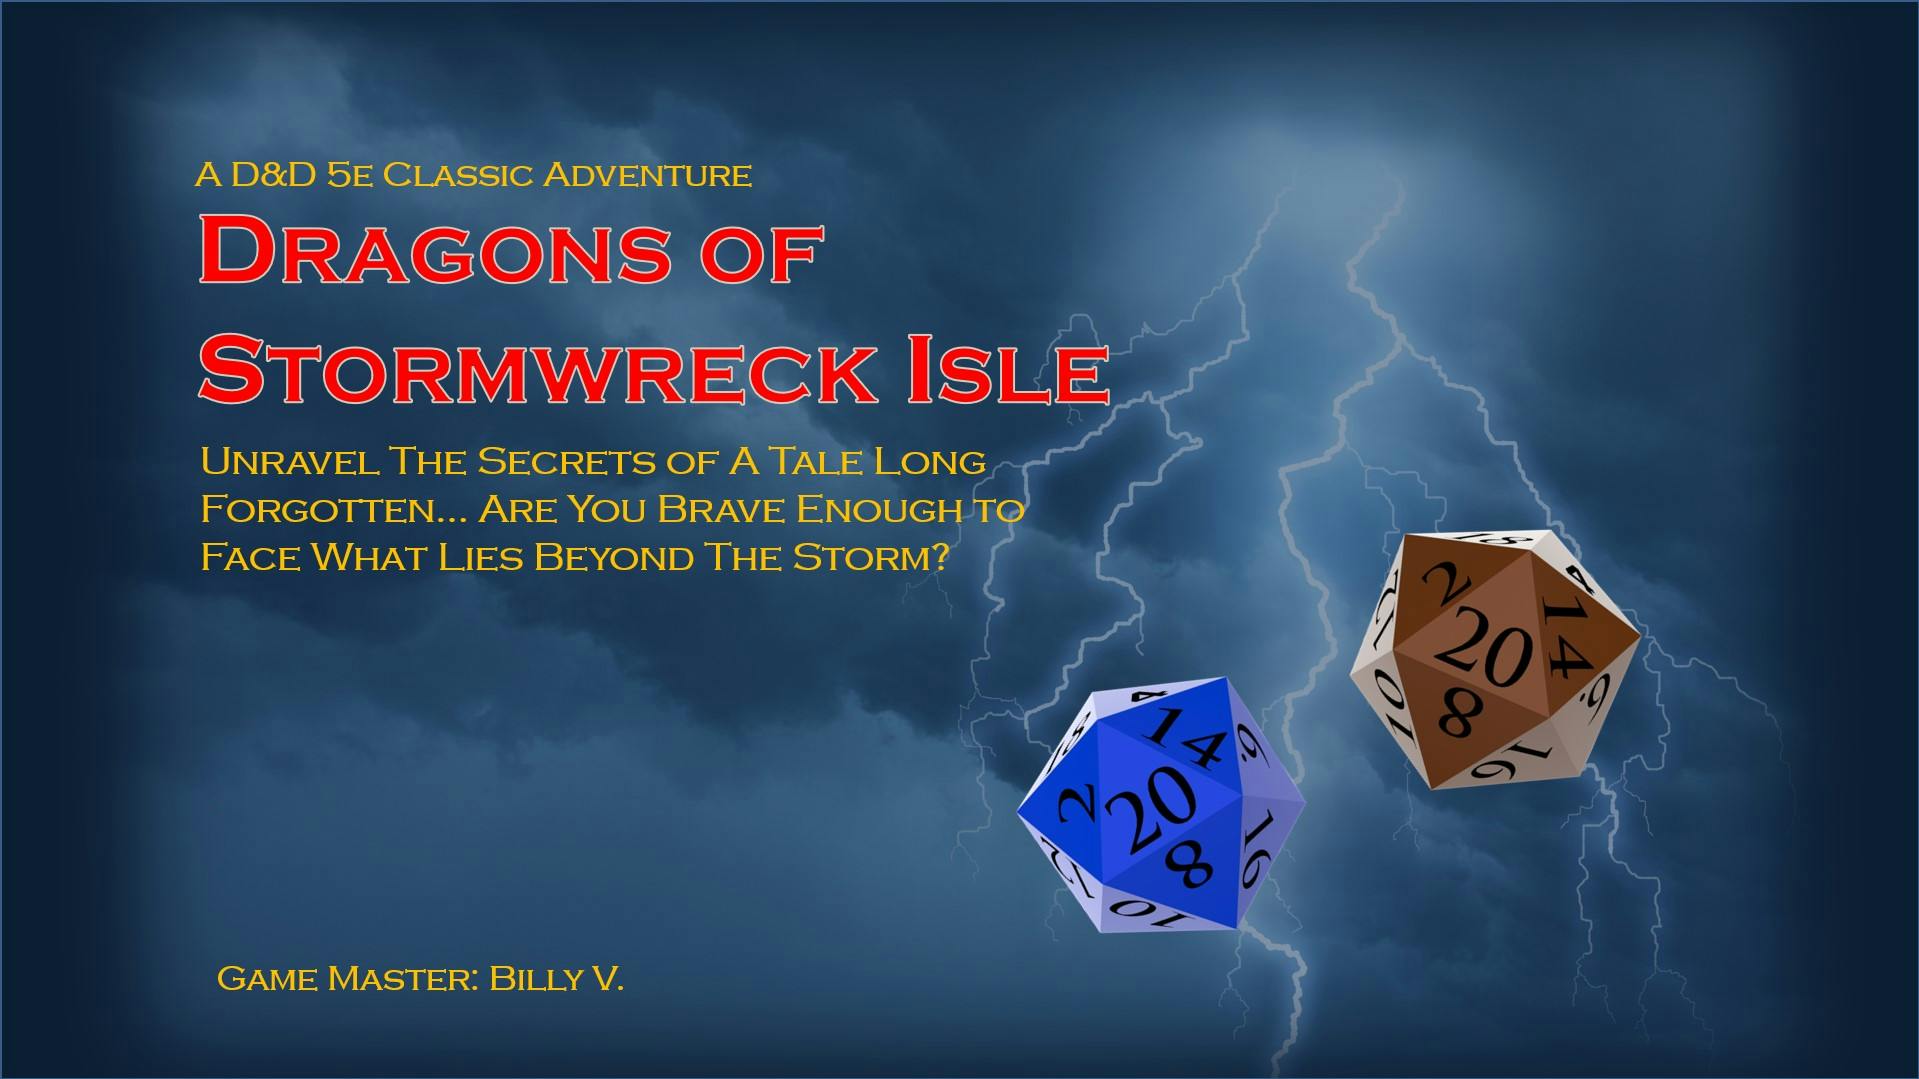 An introduction to Dungeons & Dragons 5e - Dragons of Stormwreck Isle | Beginner Friendly